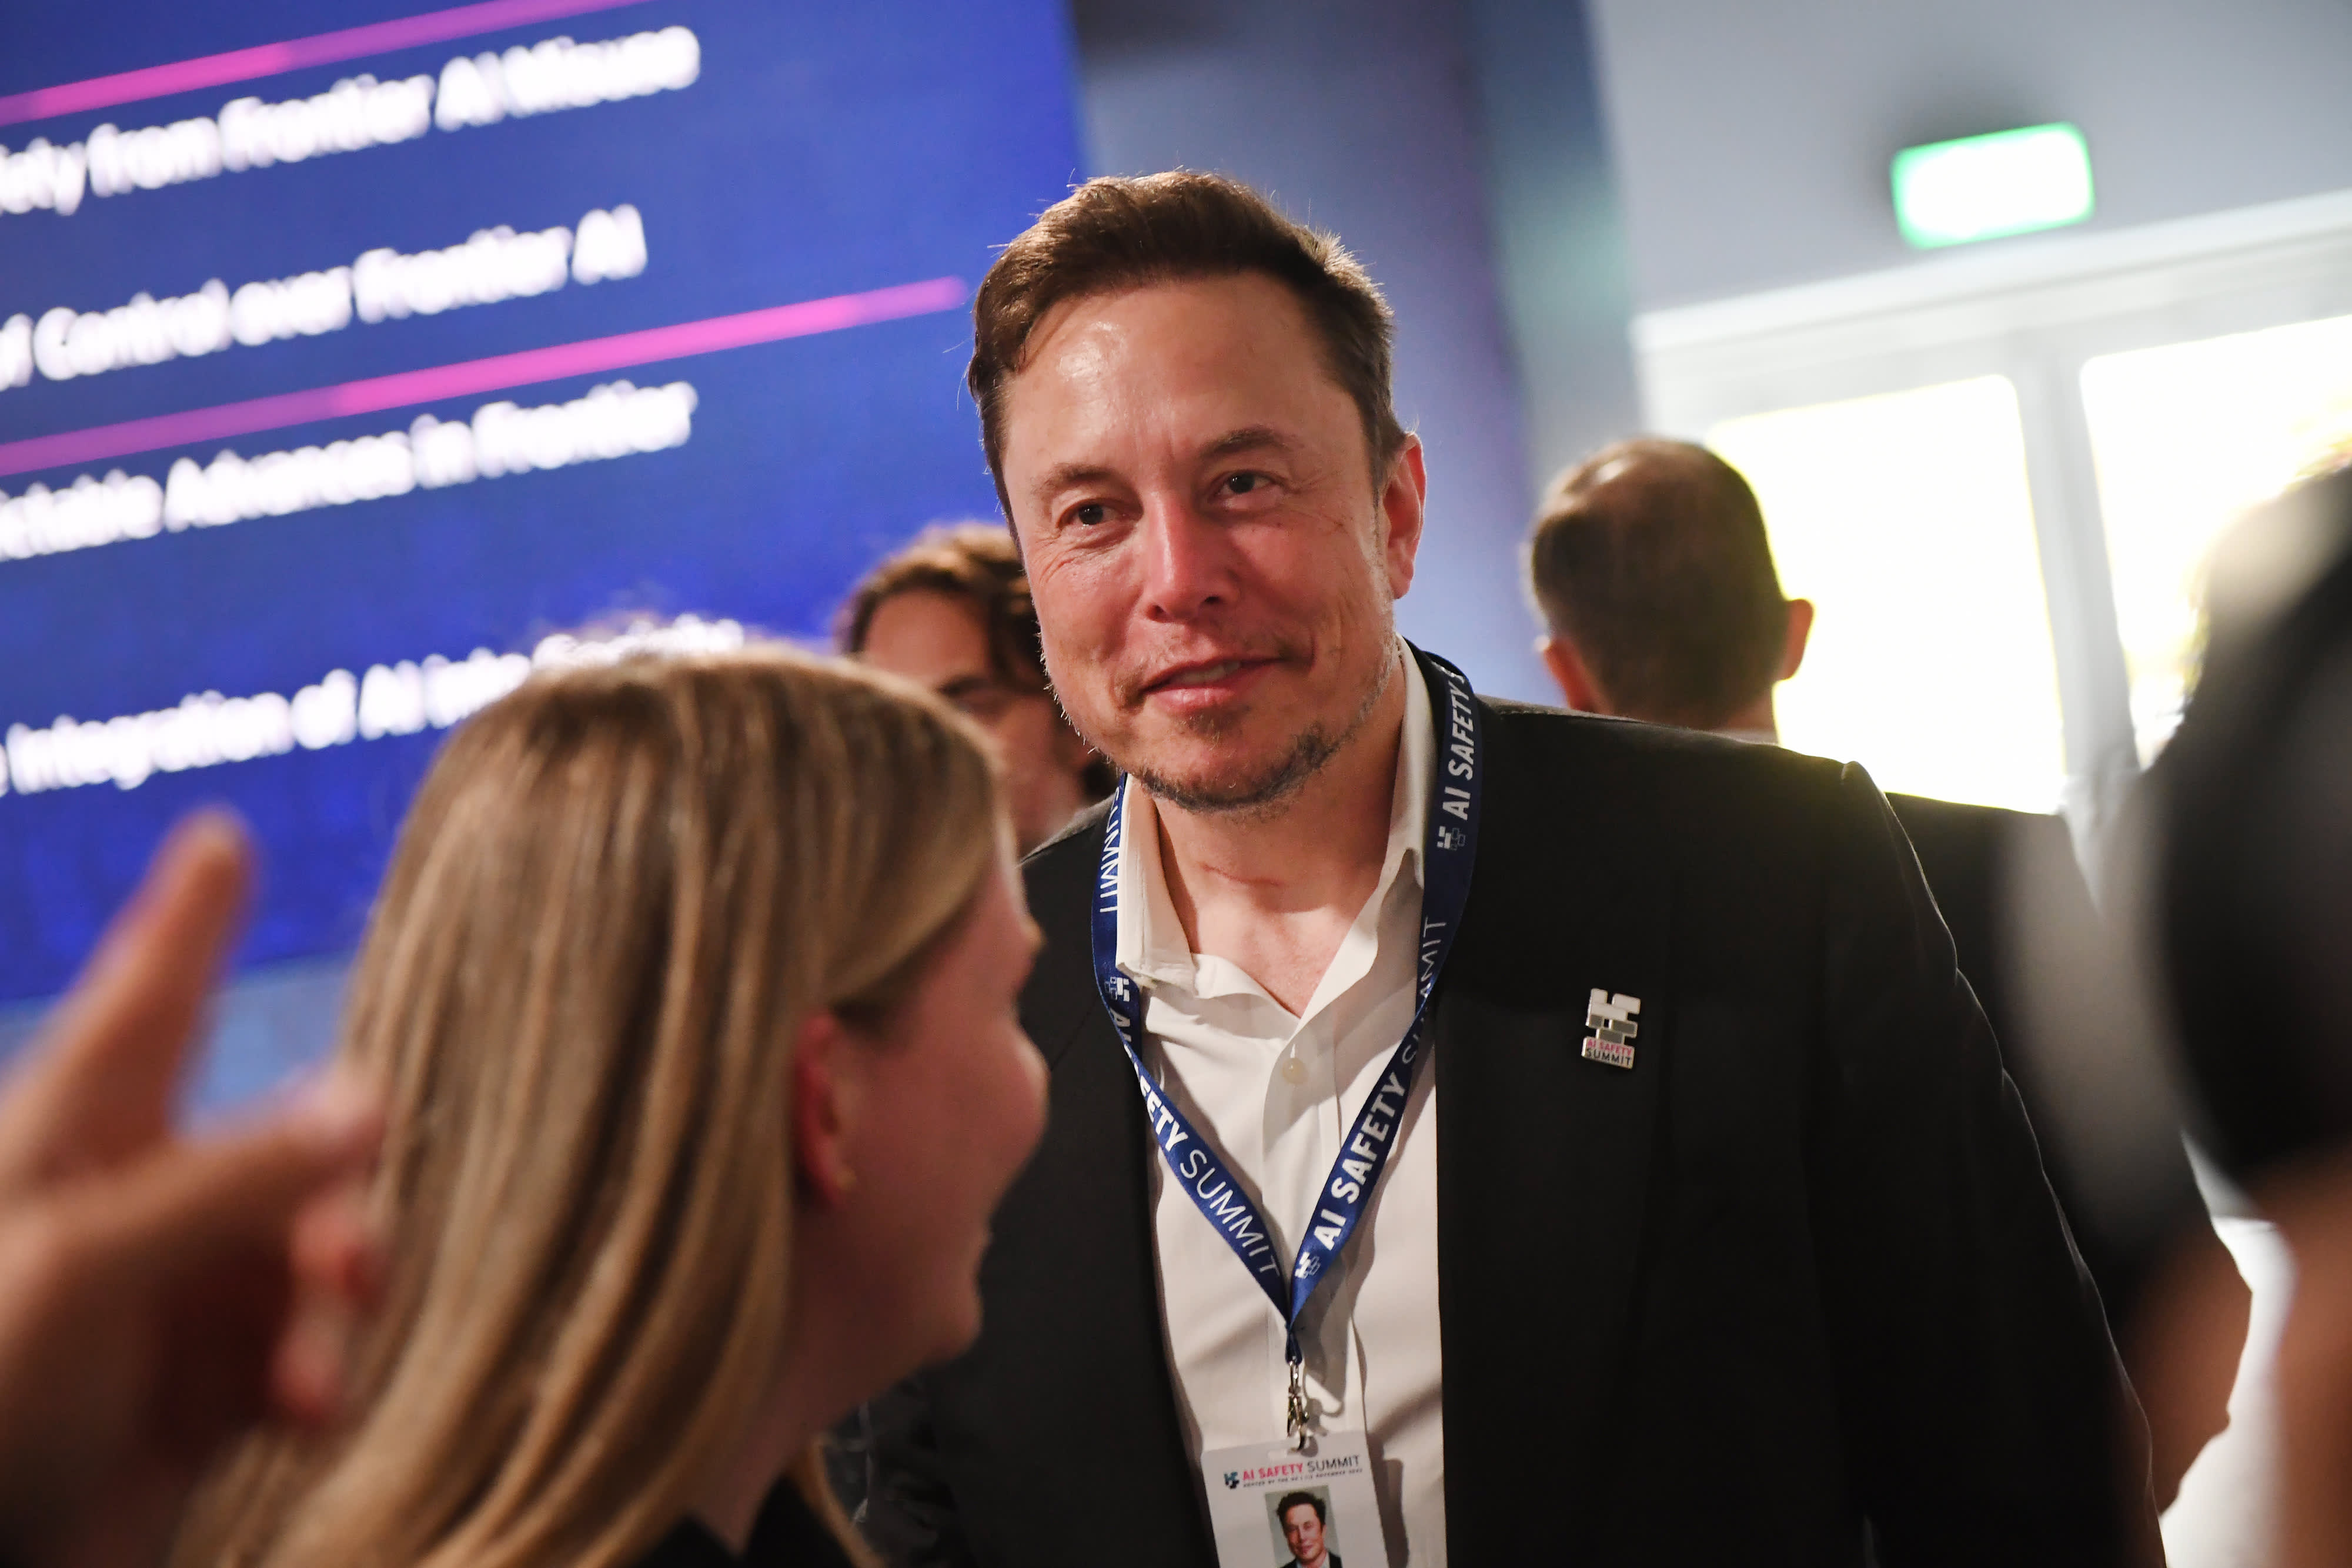 Elon Musk, head of Tesla, says that artificial intelligence will create a situation where there is no need for a job